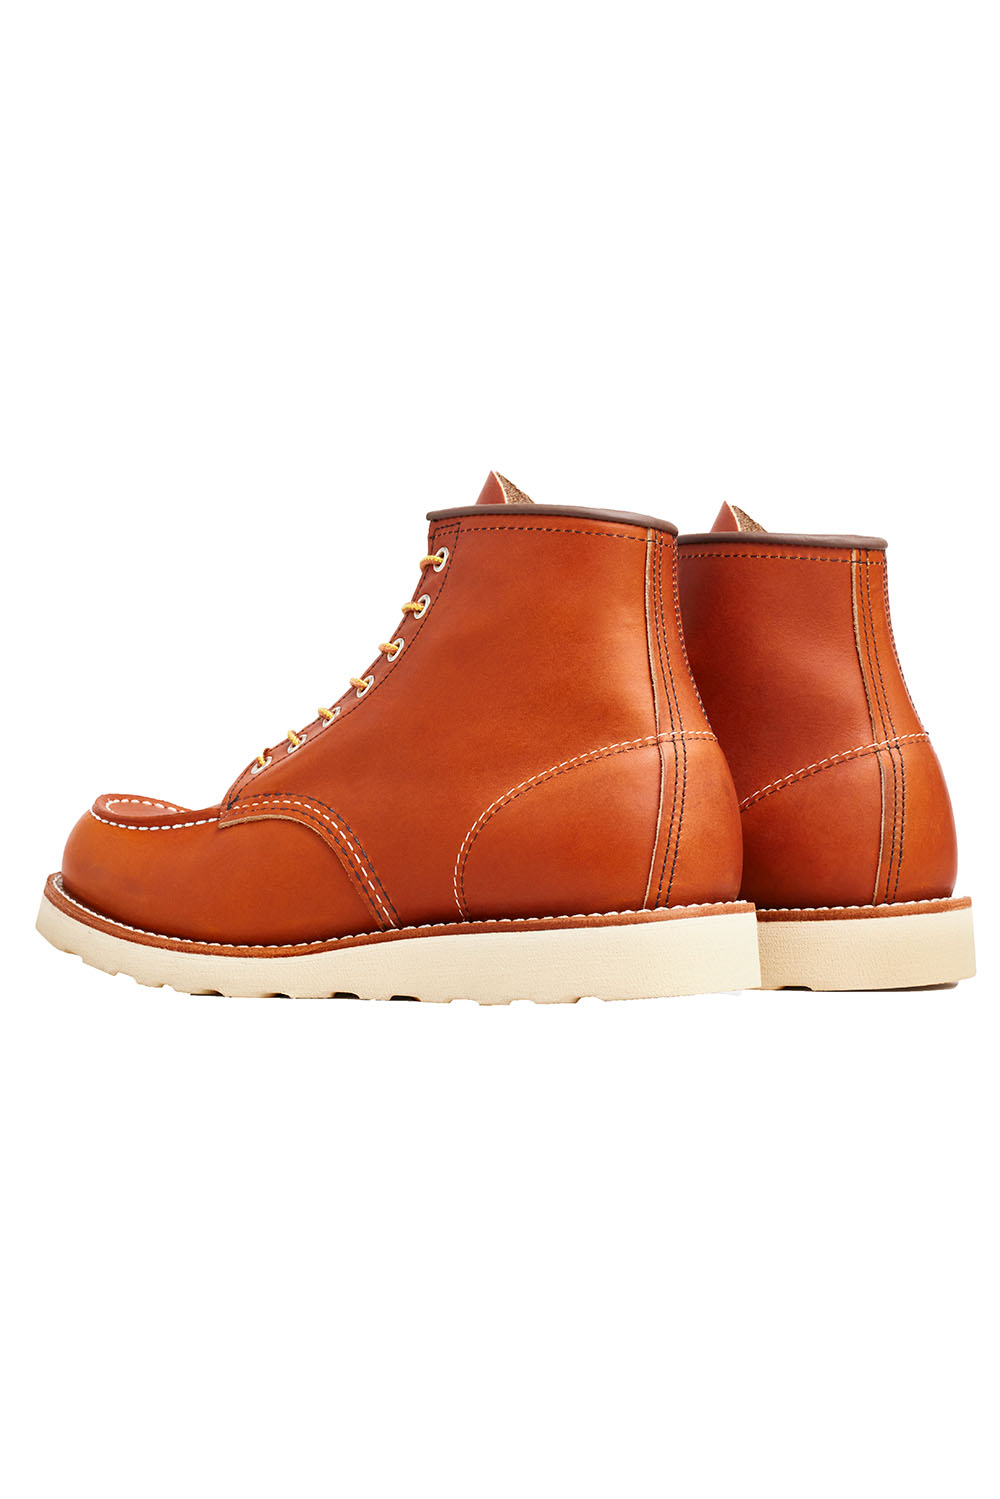 Red Wing - 6 Inch Moc Toe - Oro Legacy - Back